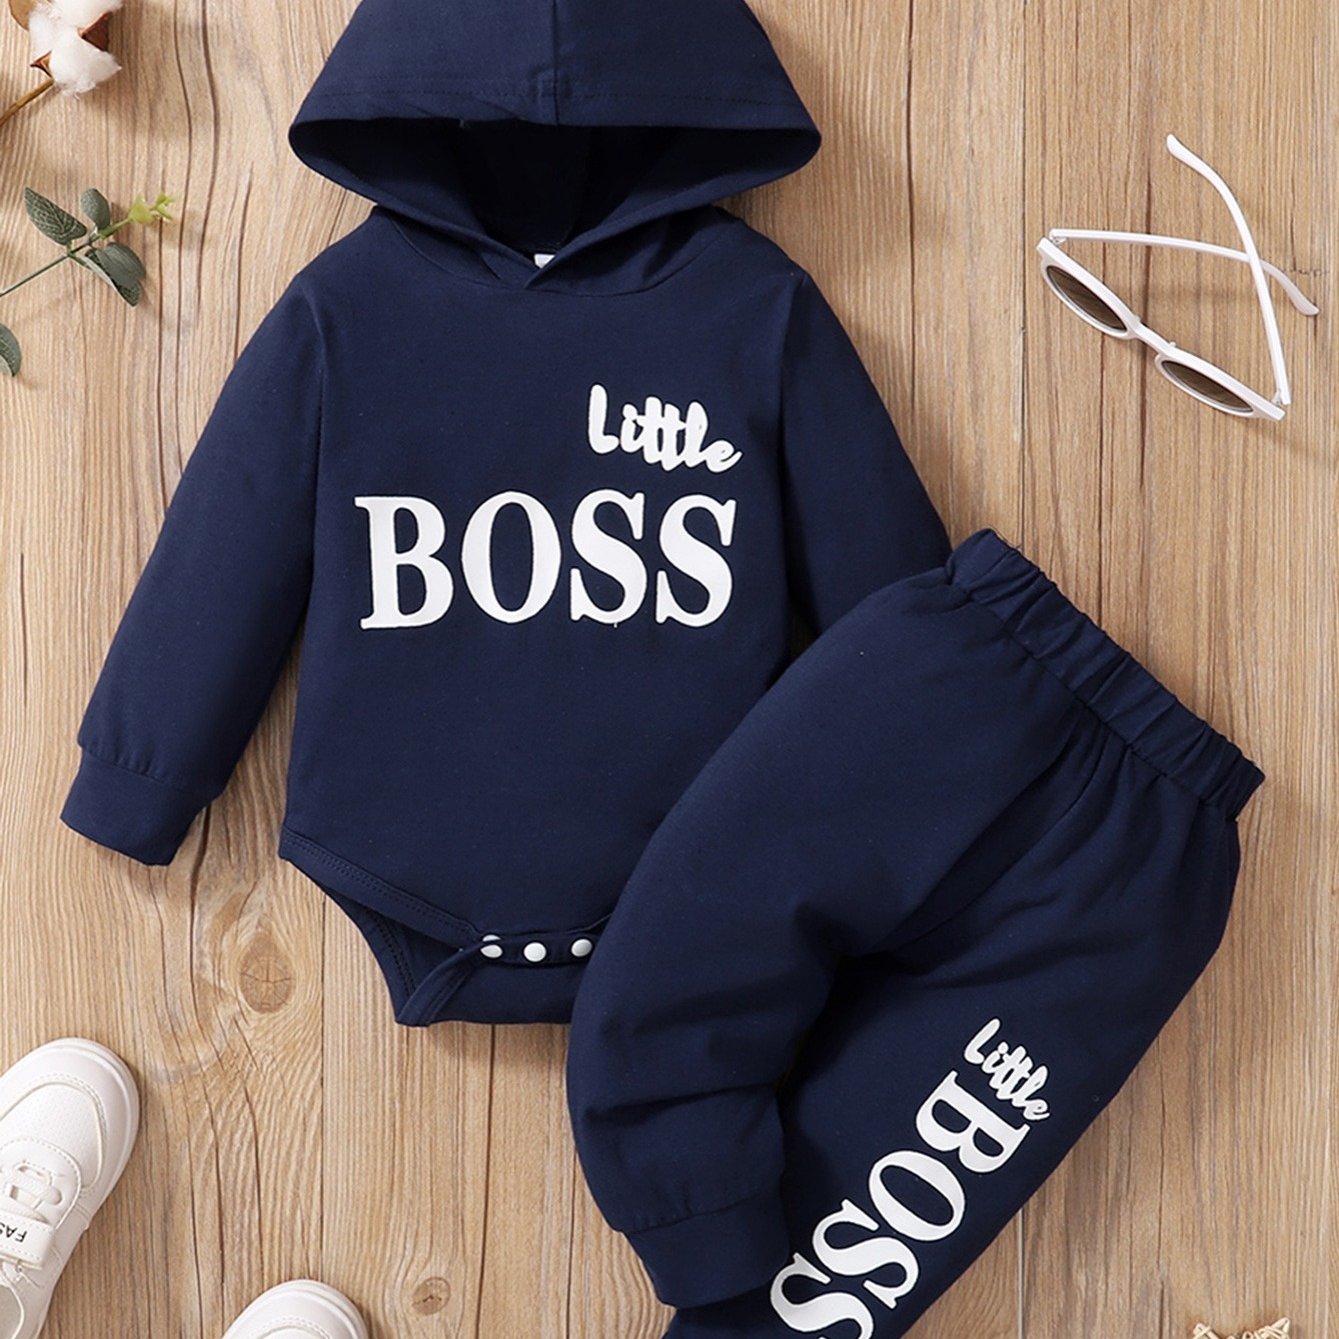 2pcs Baby Boys Clothes "BOSS" Hooded Bodysuit + Matching Pants Cotton Romper Onesie Bottoms Trousers Set Spring Fall